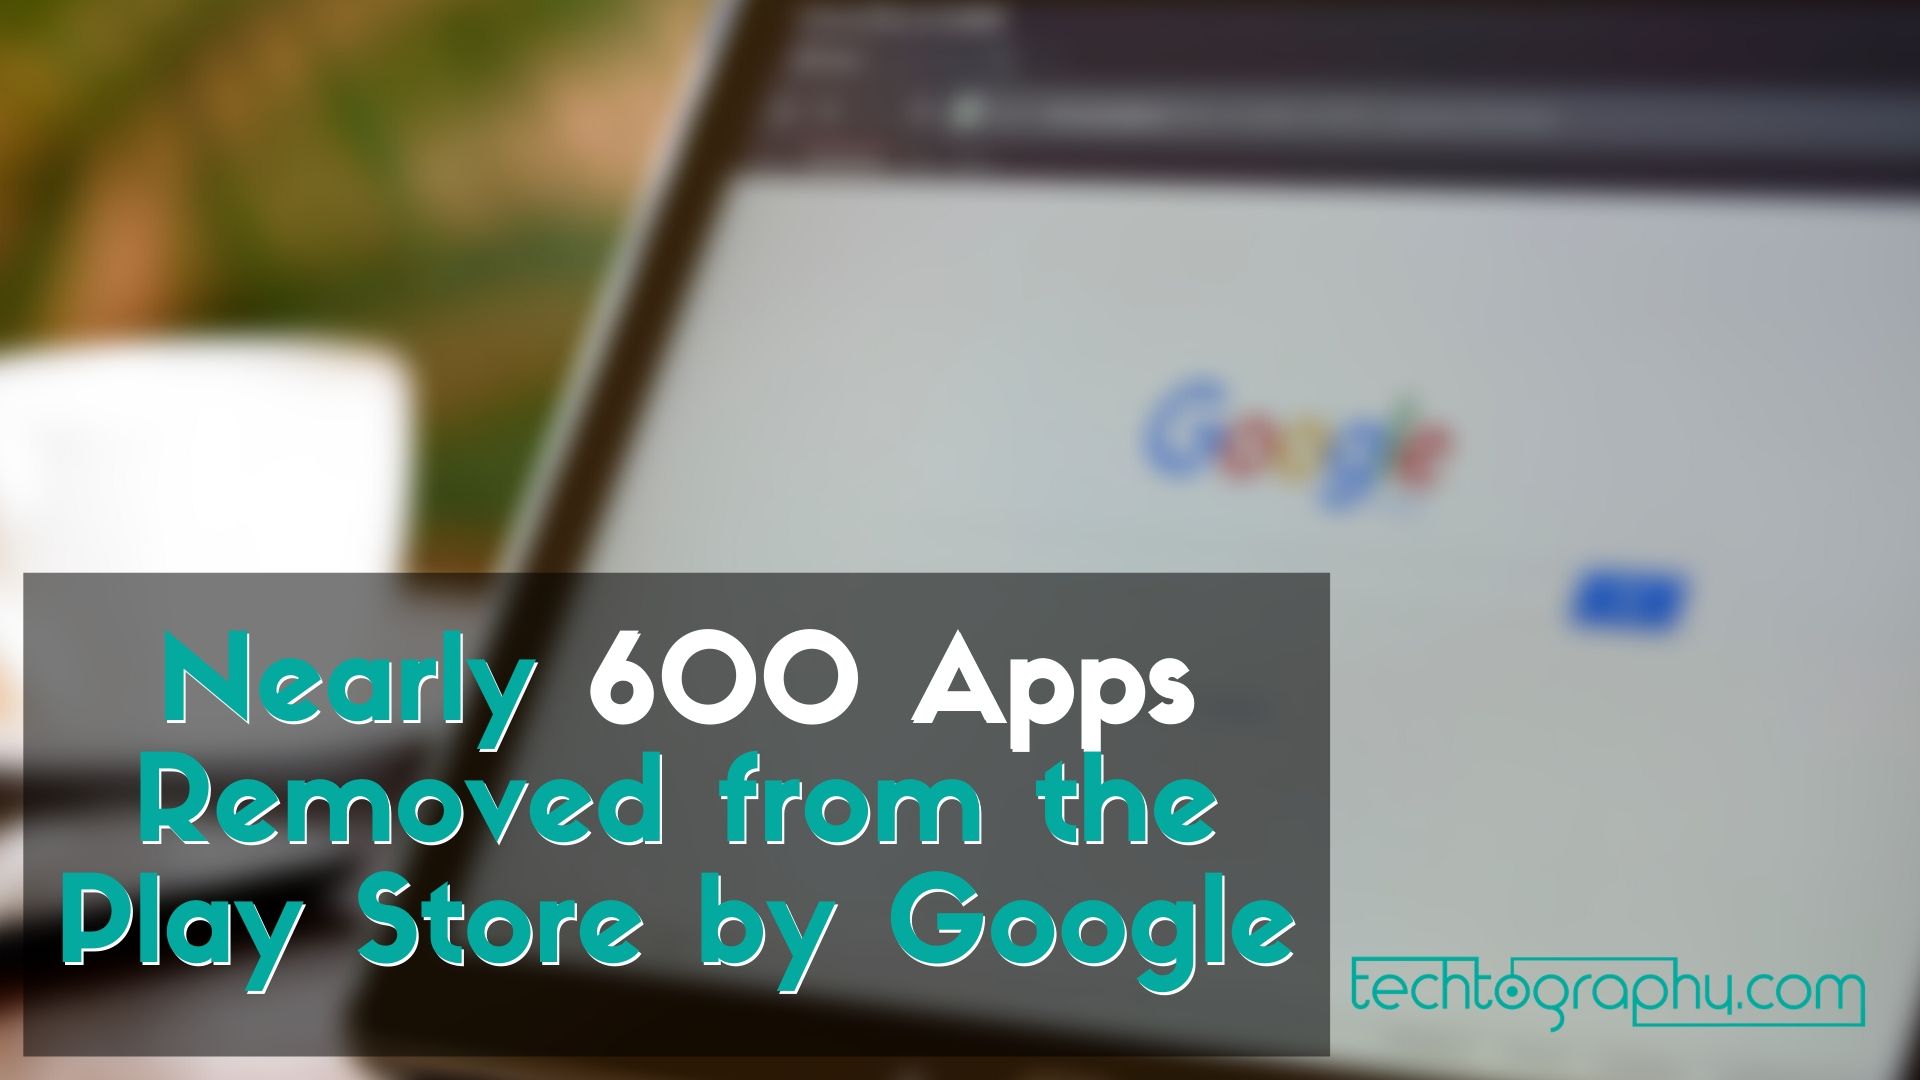 Nearly 600 Apps Removed from the Play Store by Google